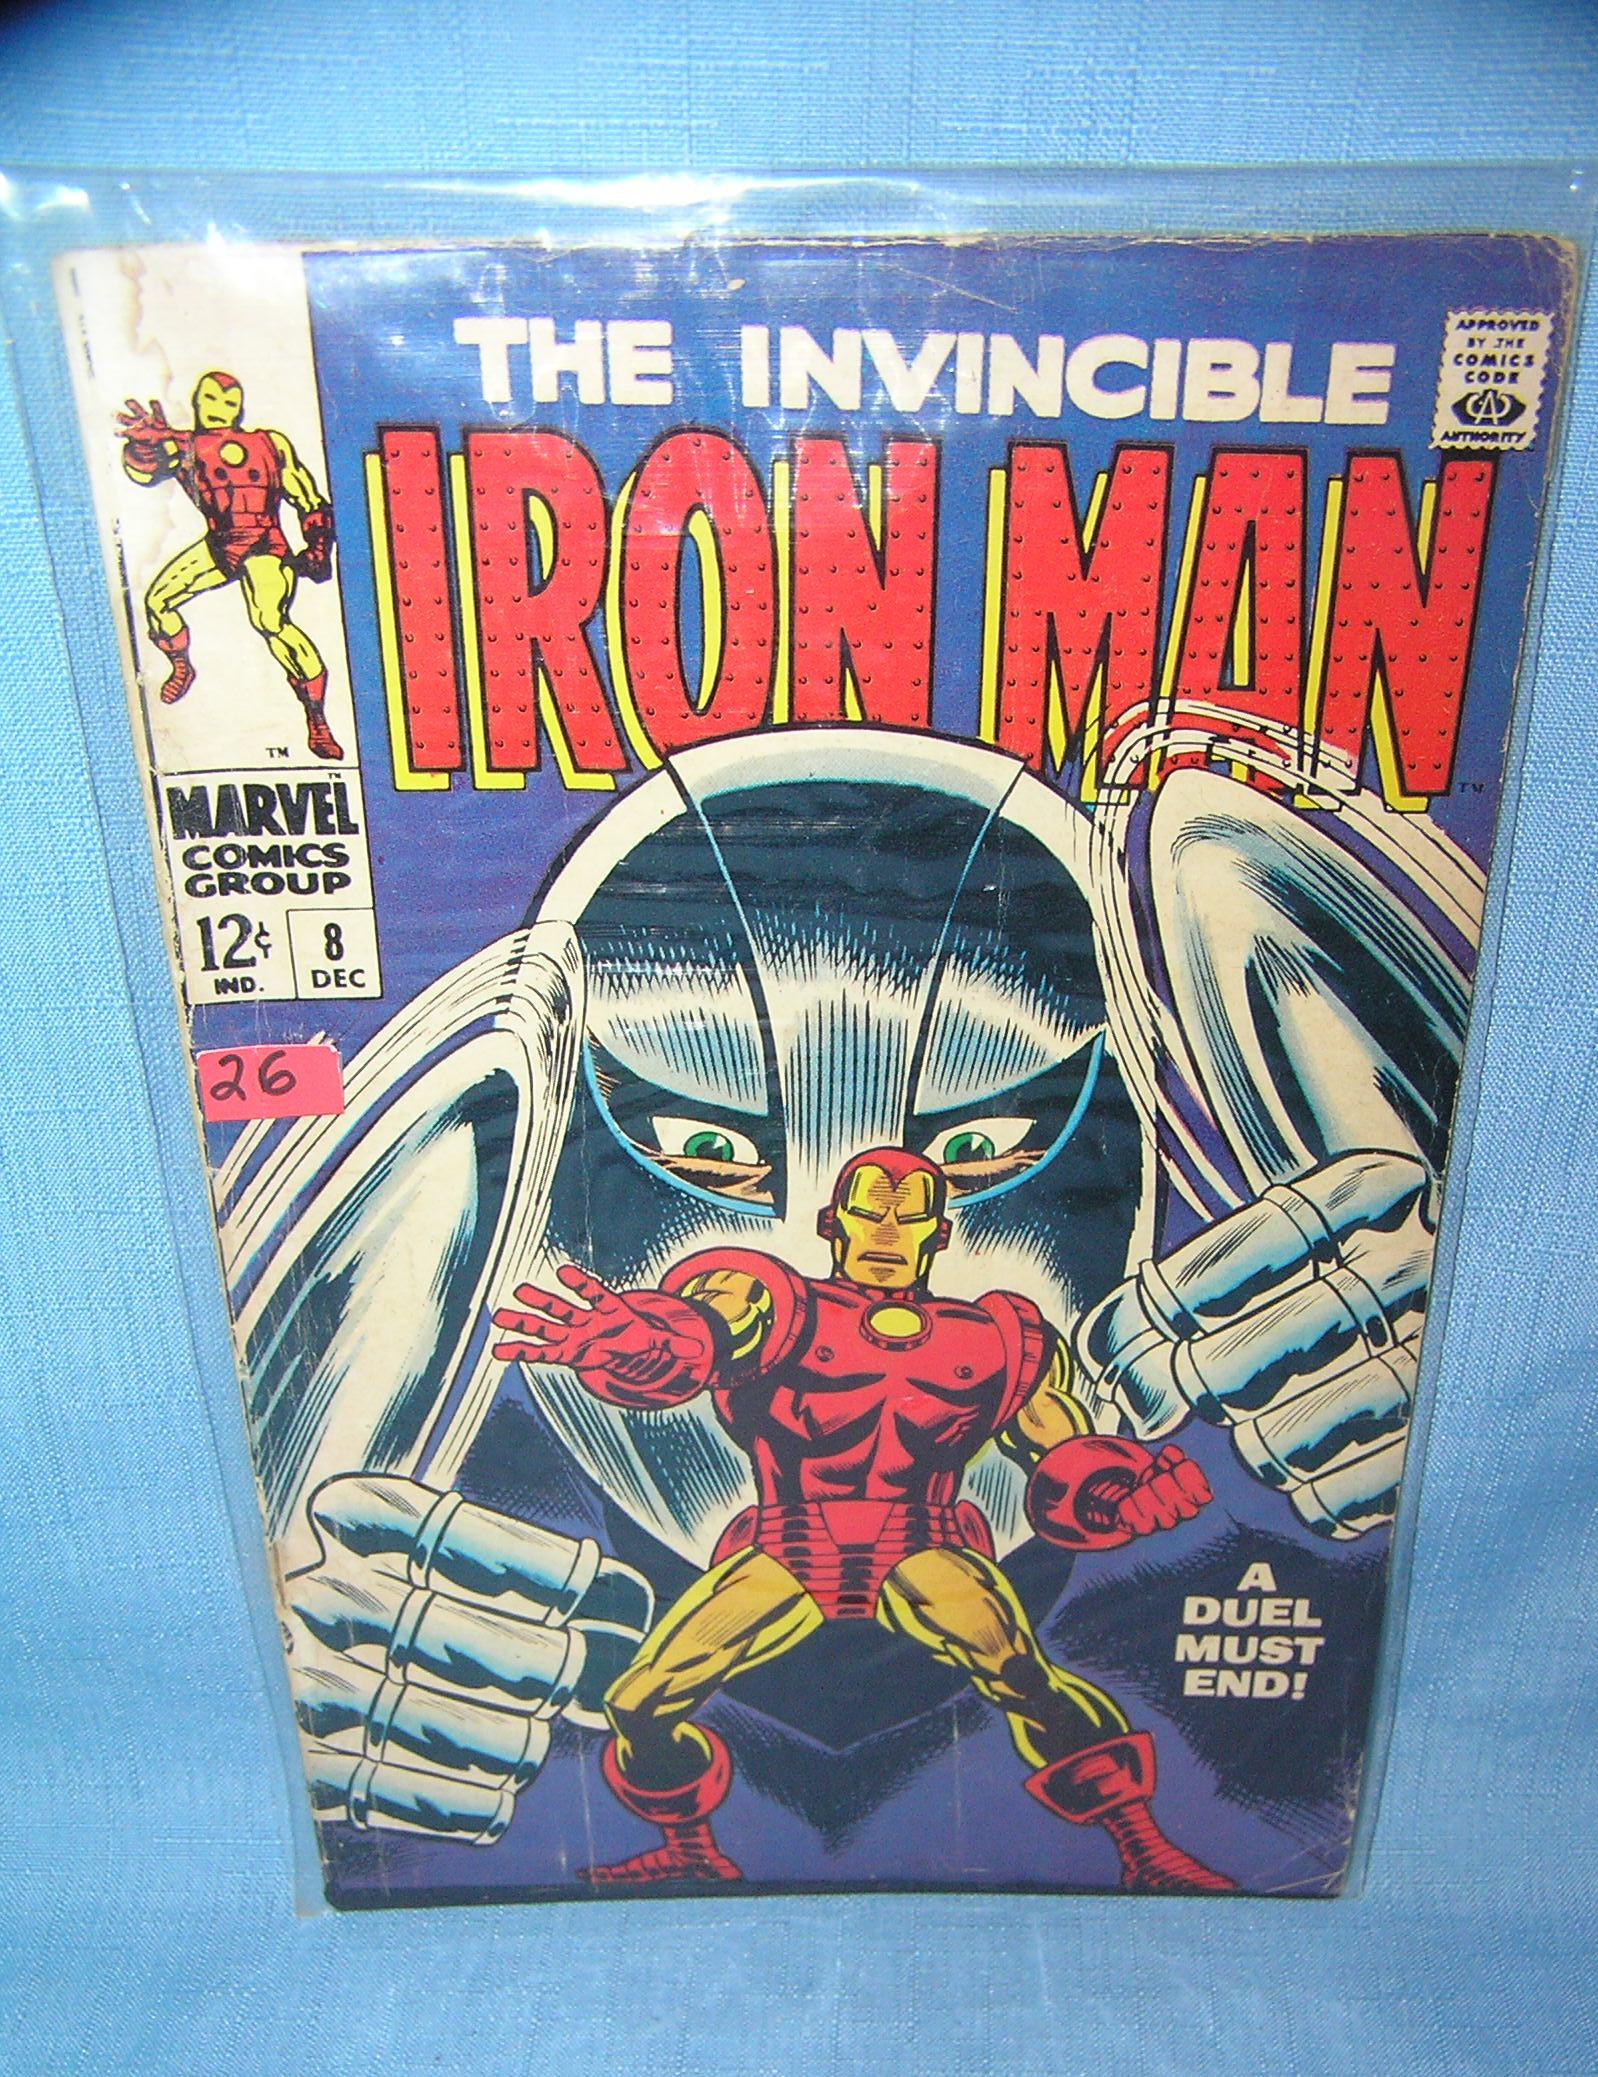 Early Ironman comic book, number 8 by Marvel comics